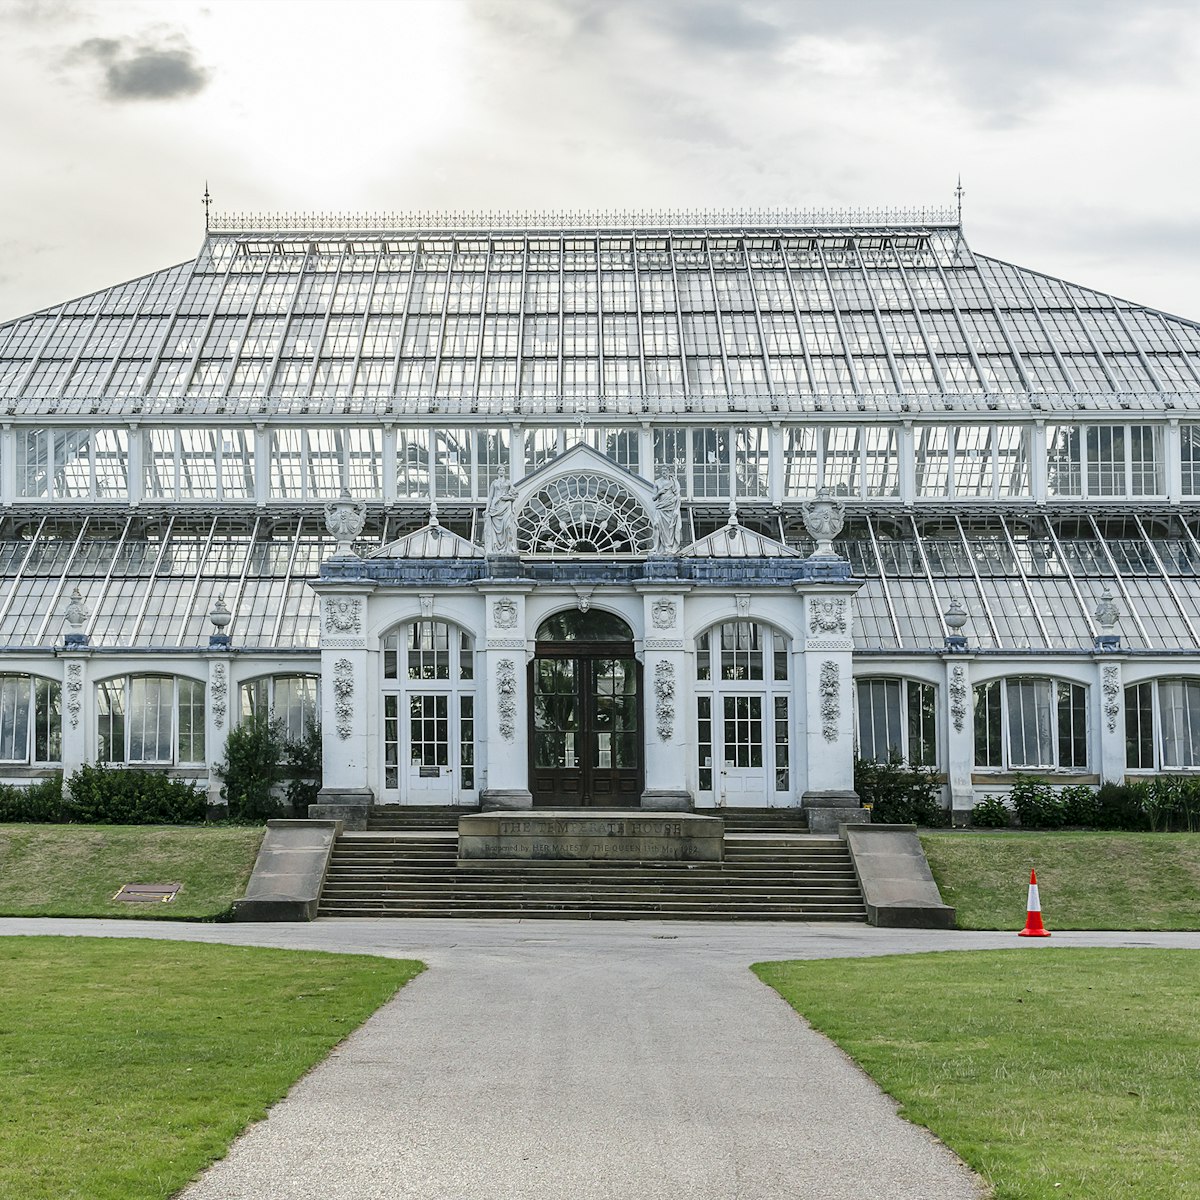 Temperate House on the grounds of Kew Gardens, Richmond, London.